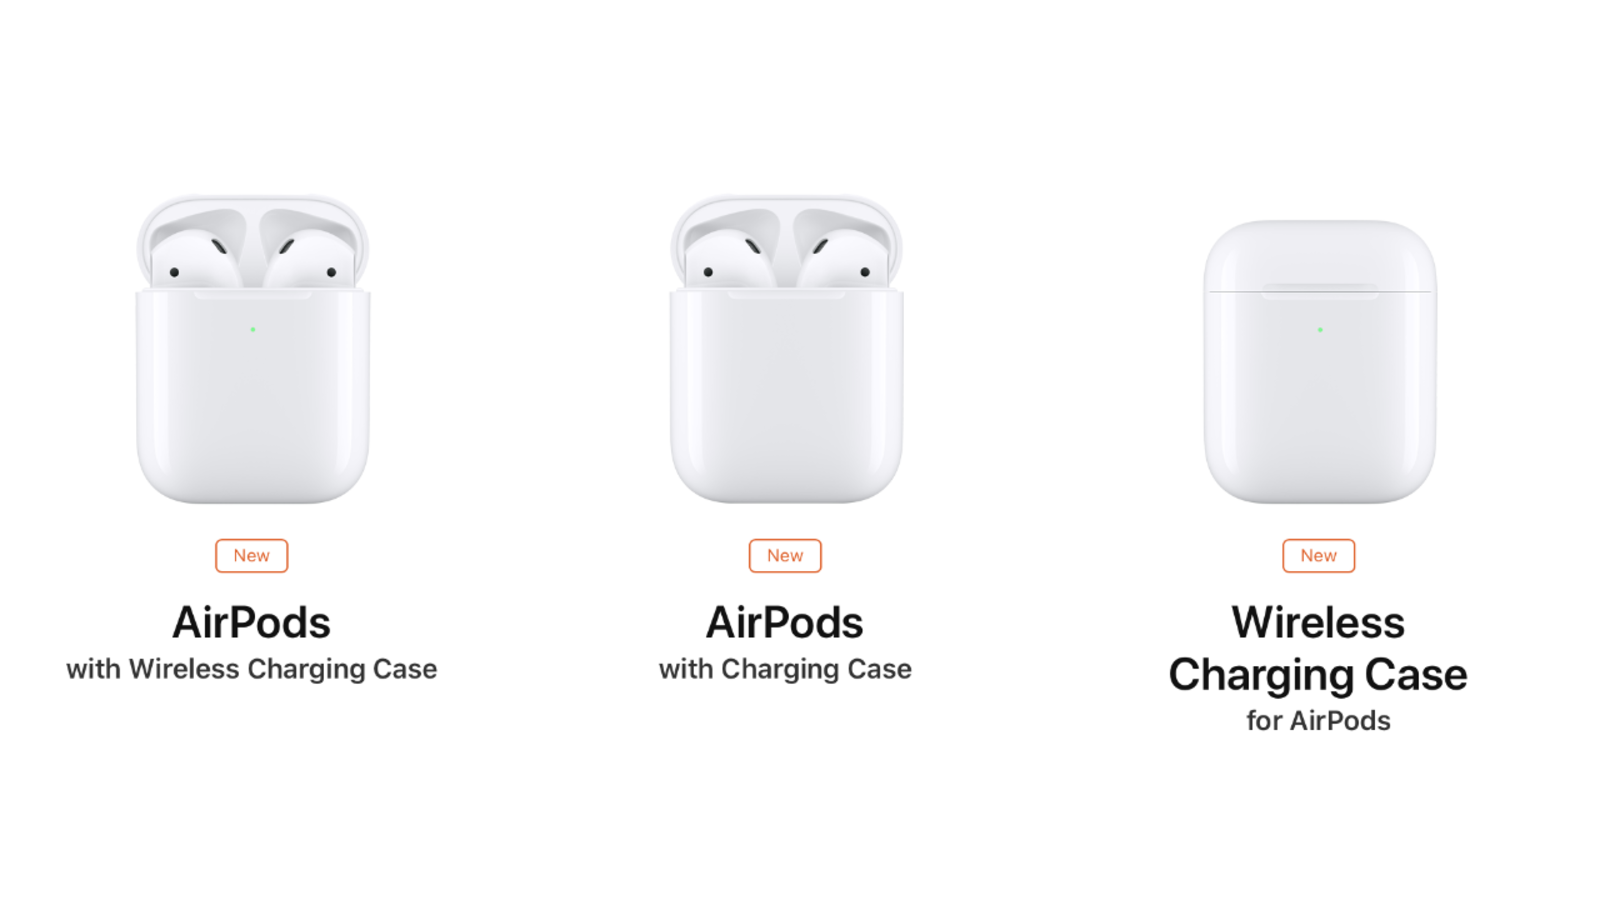 AirPods 2 vs AirPods: What difference?